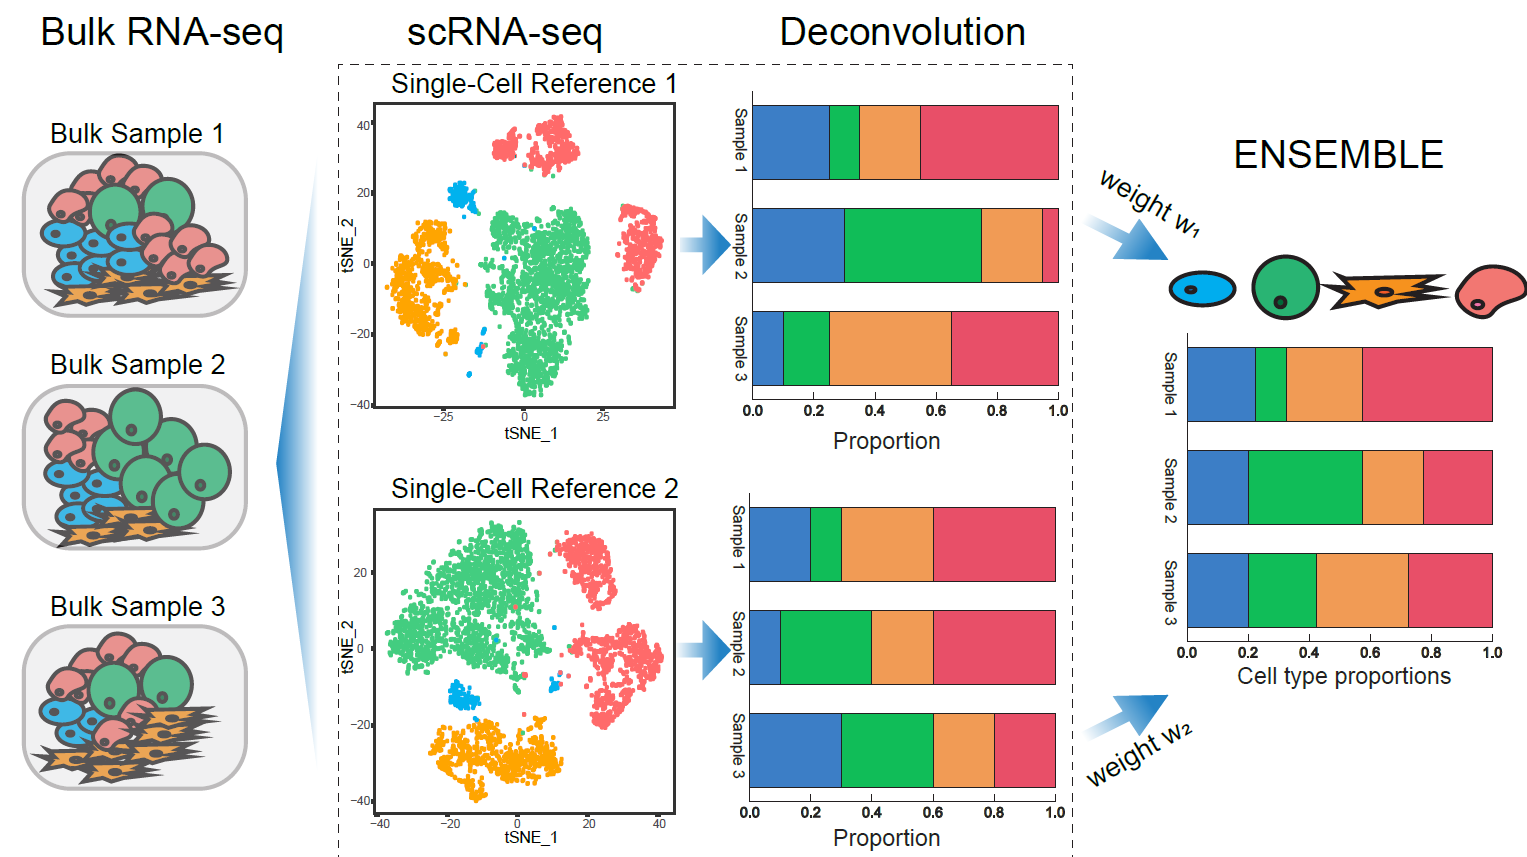 Bulk RNAseq deconvolution by scRNAseq with multireference datasets